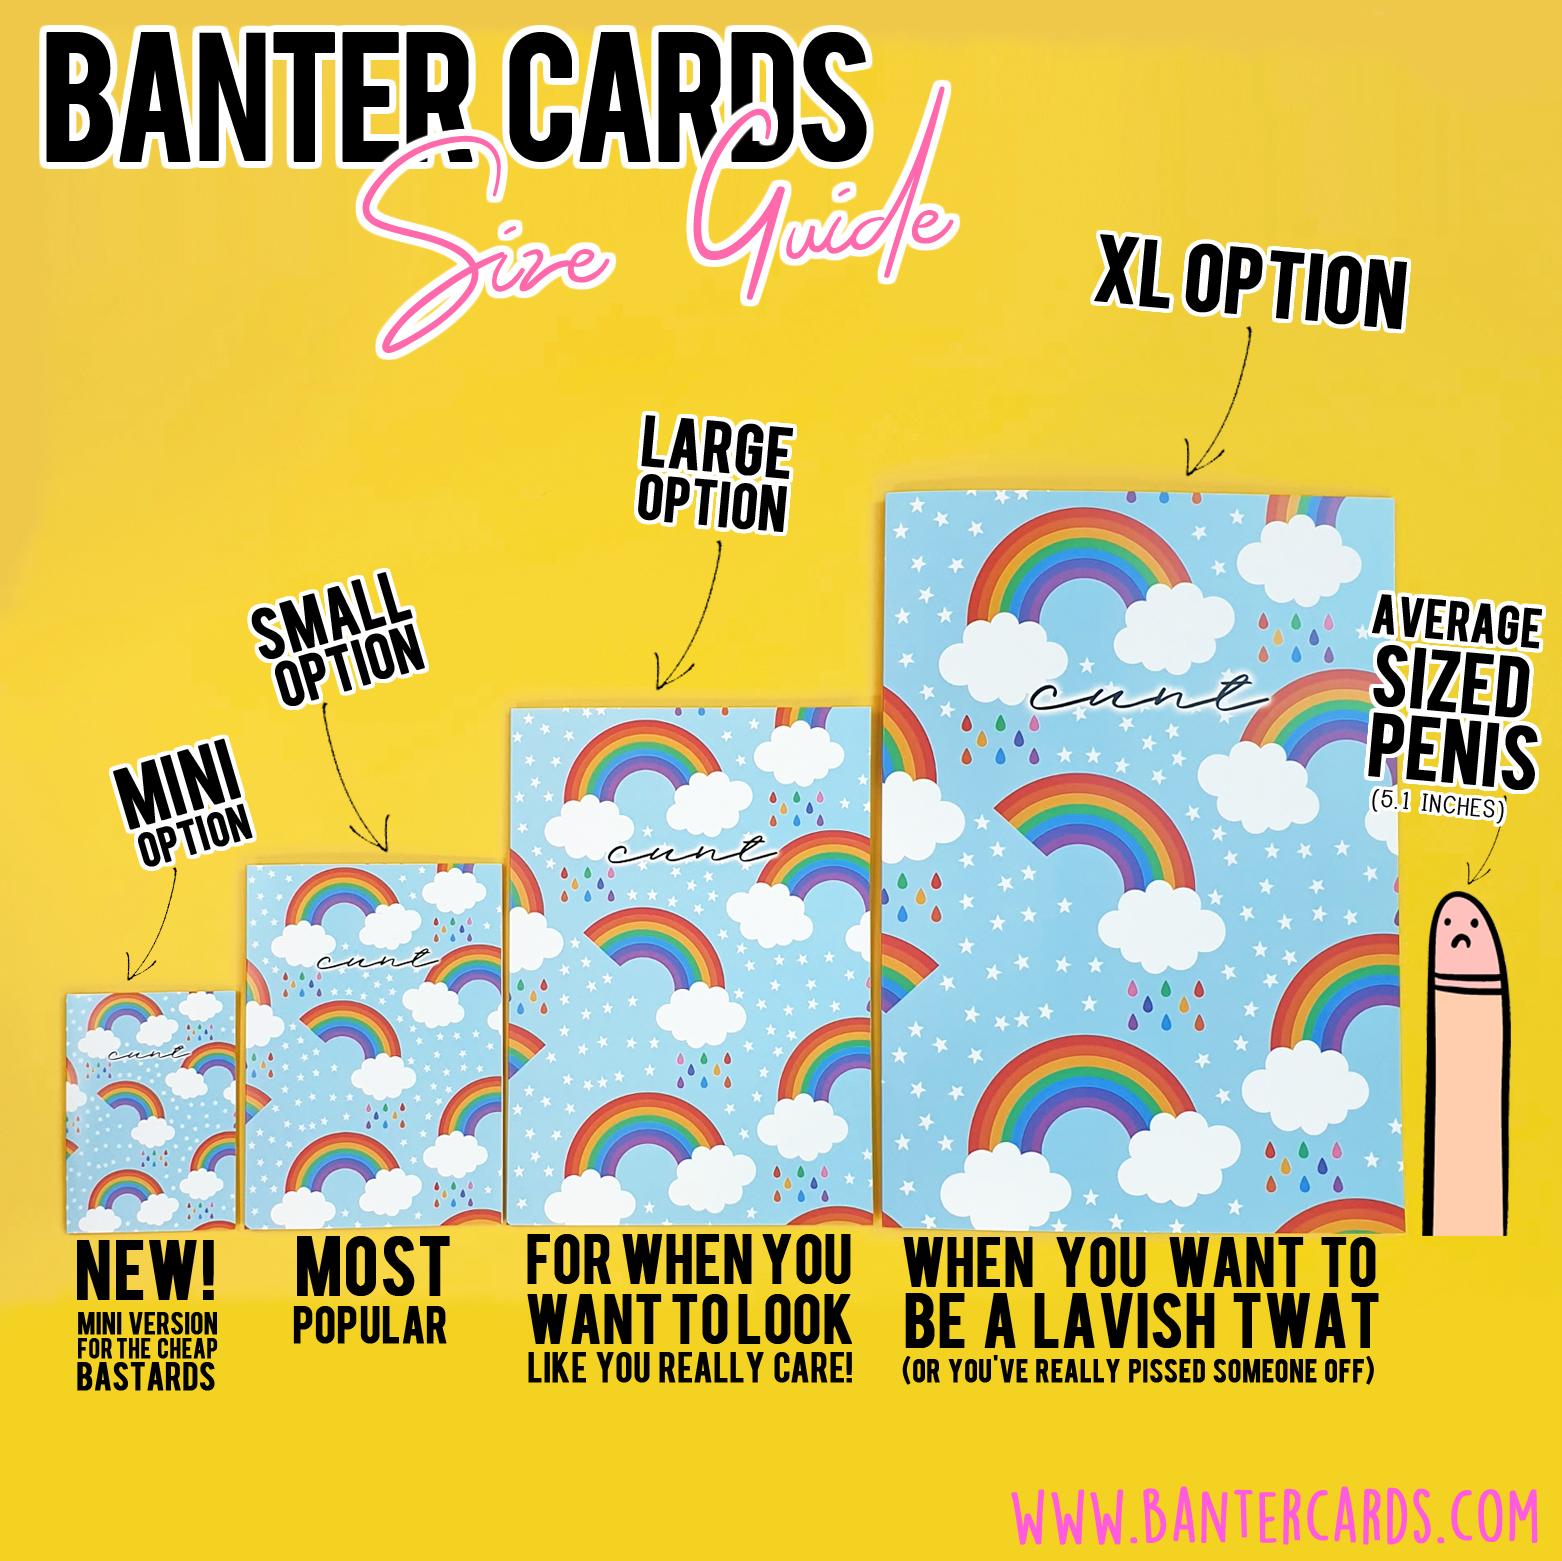 Banter Cards Sizing Guide